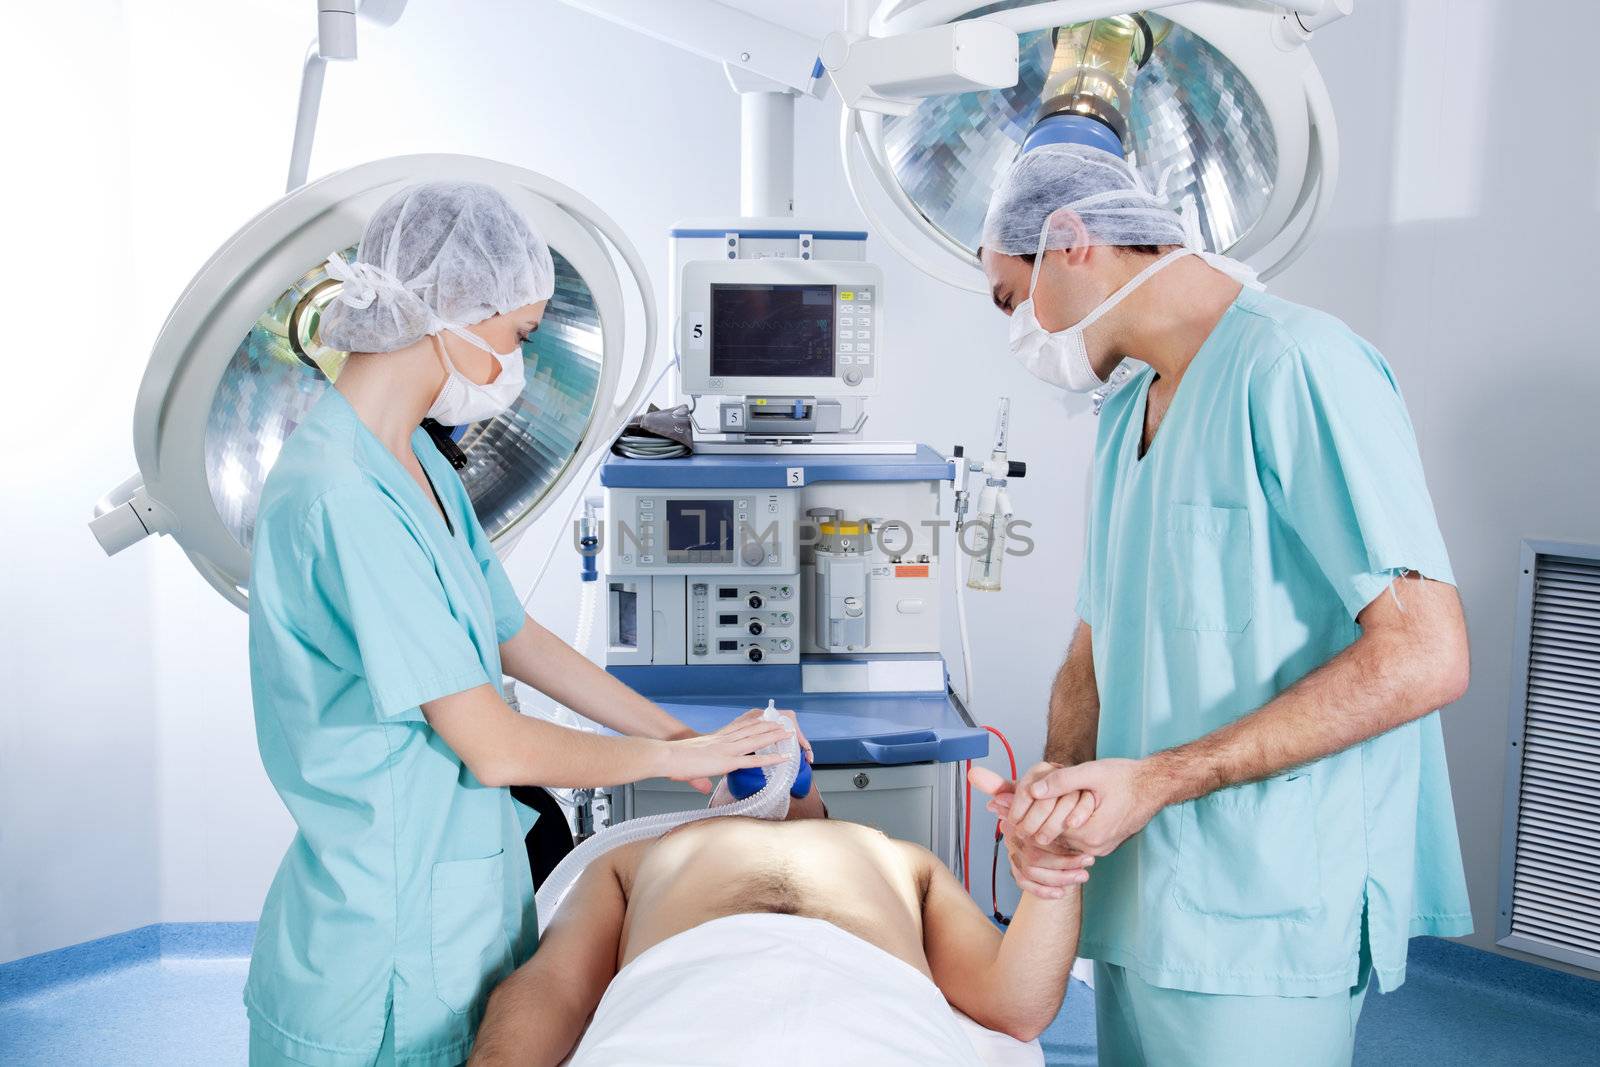 Surgeons operating on patient in an operating theatre